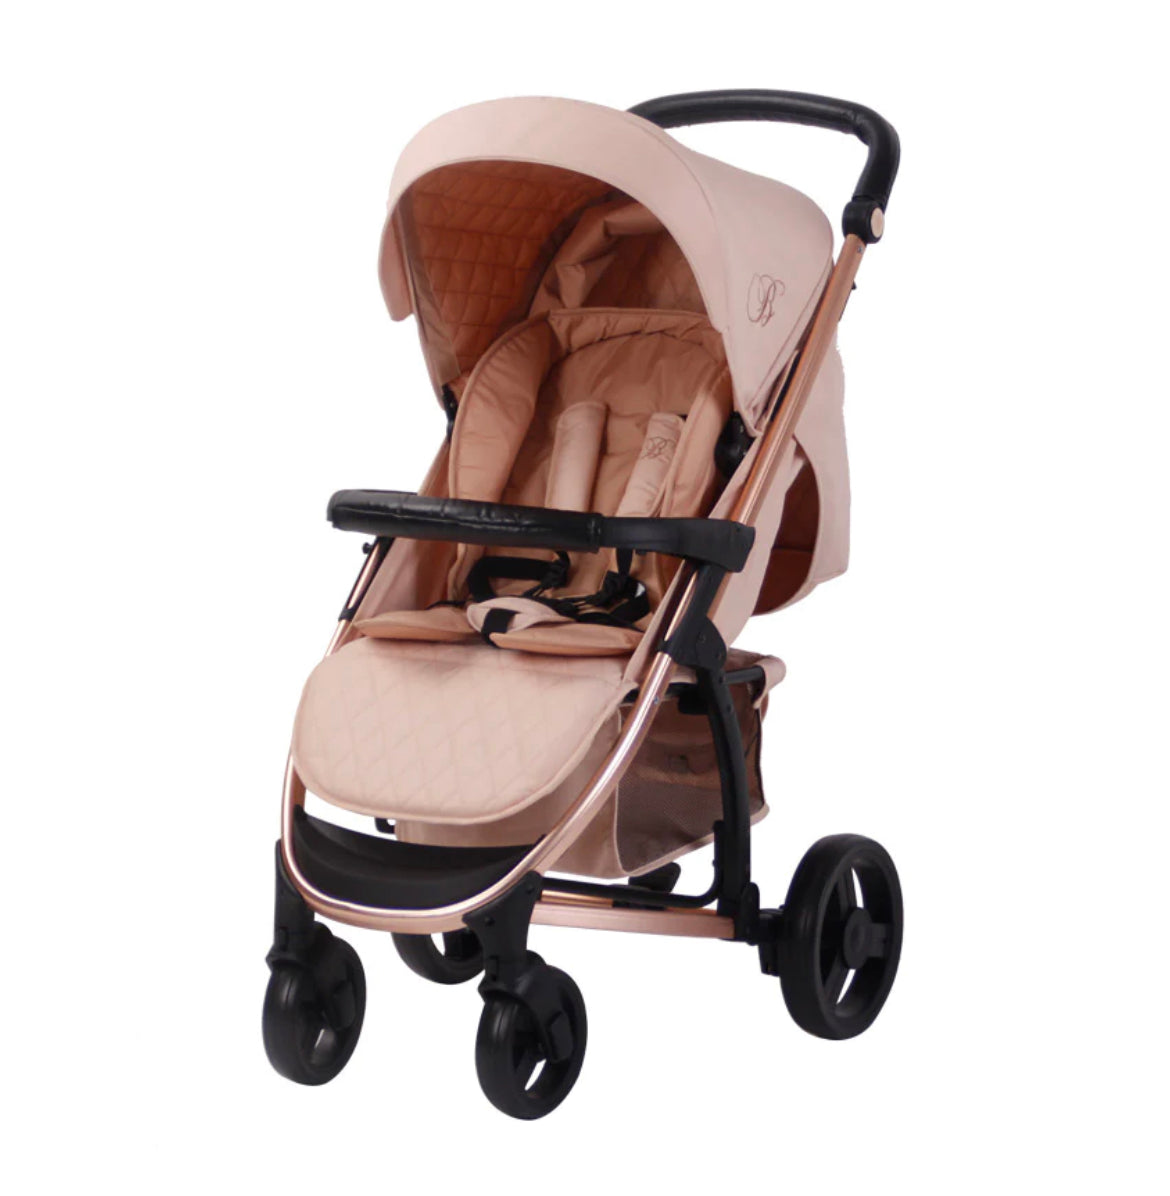 MB200i Billie Faiers Blush iSize Travel System